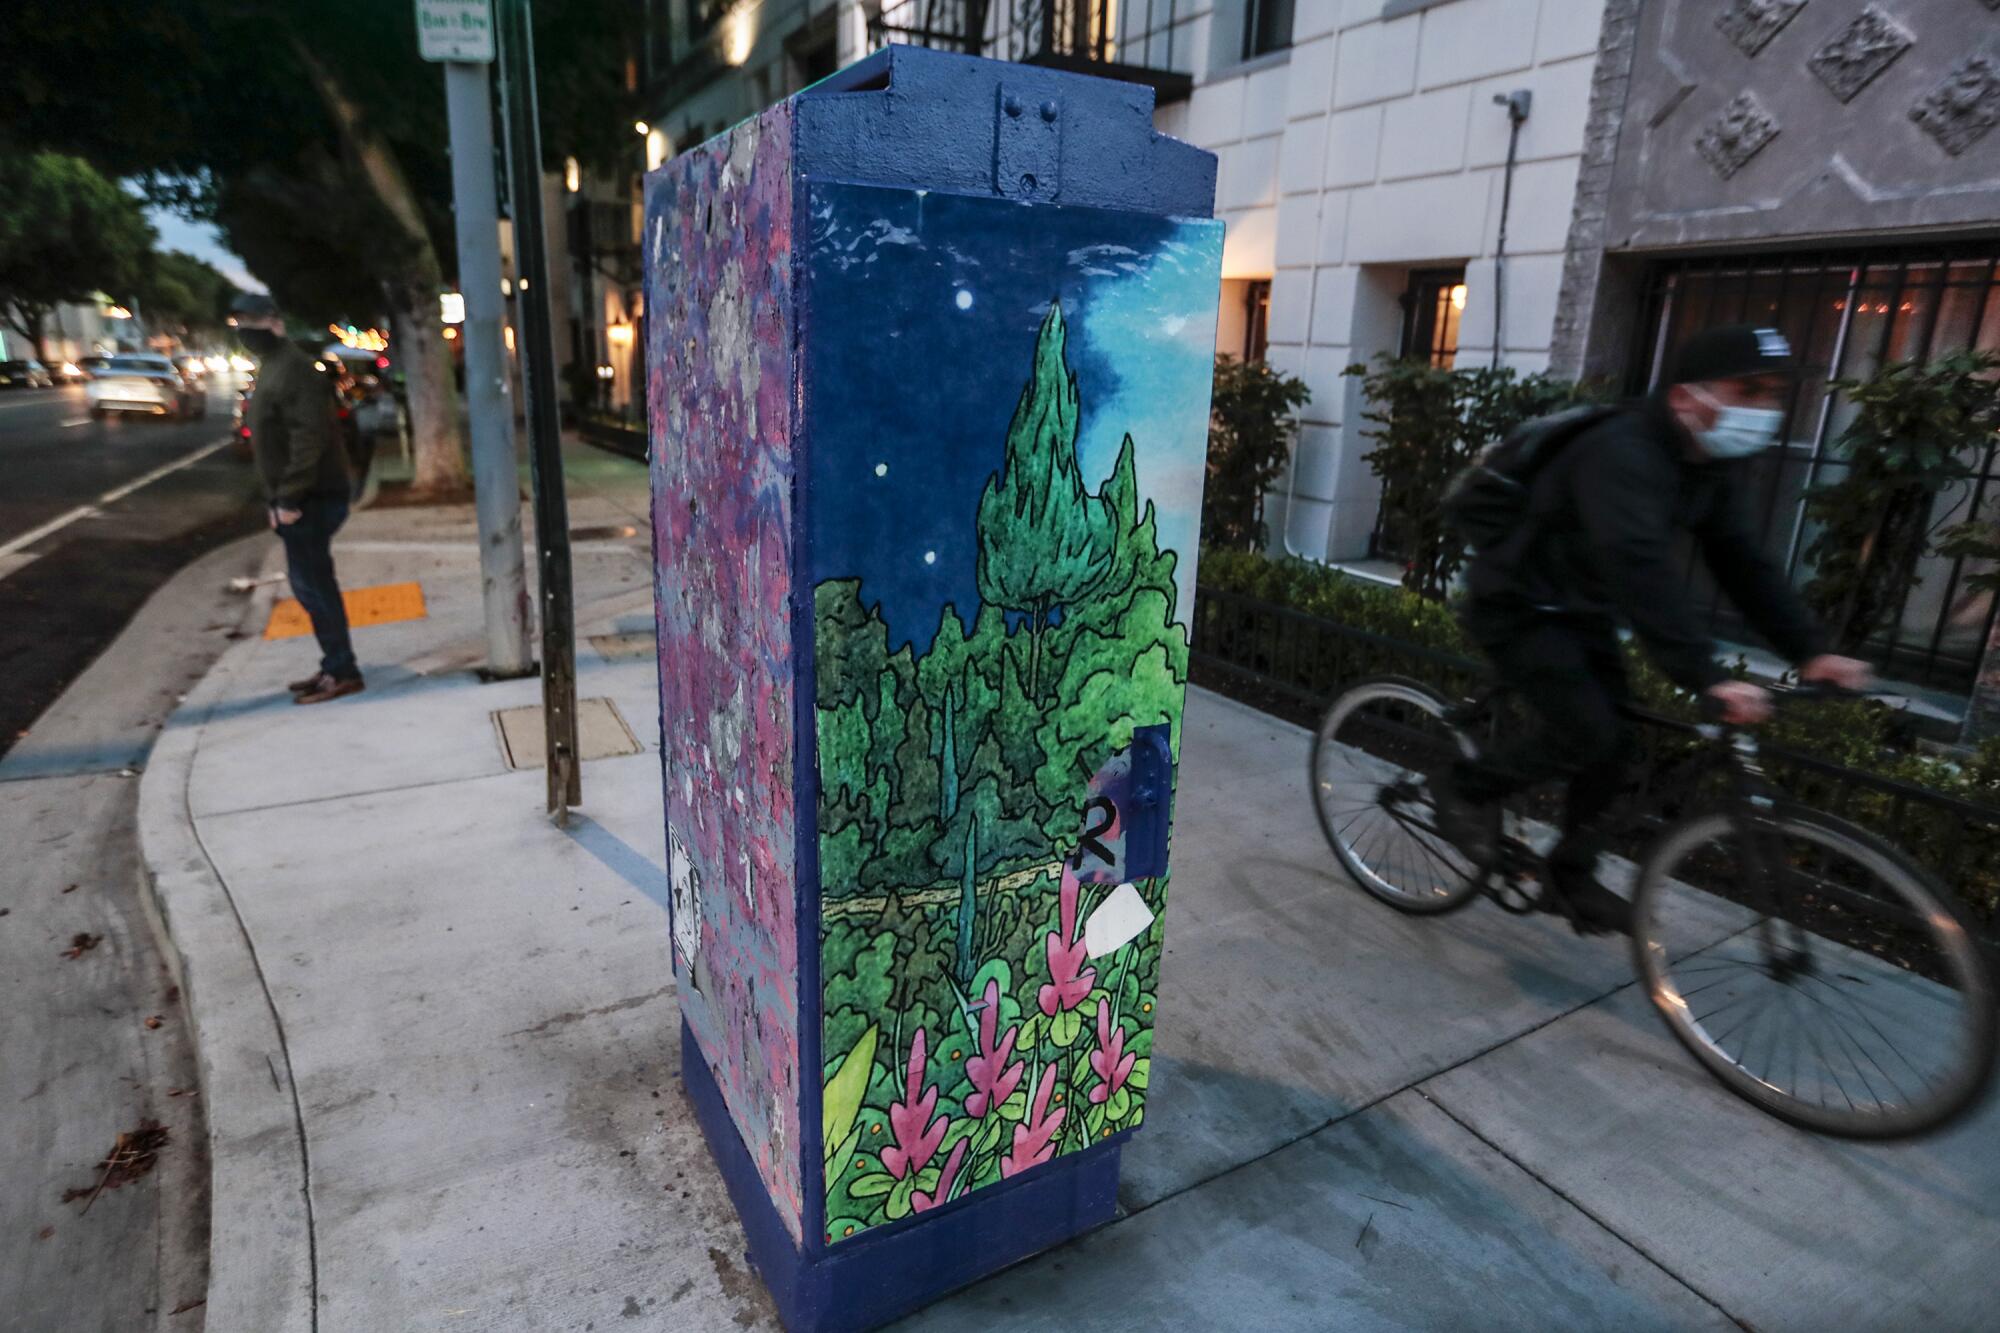 Artist Terrance Whitten's work was commissioned to adorn a Silverlake power box